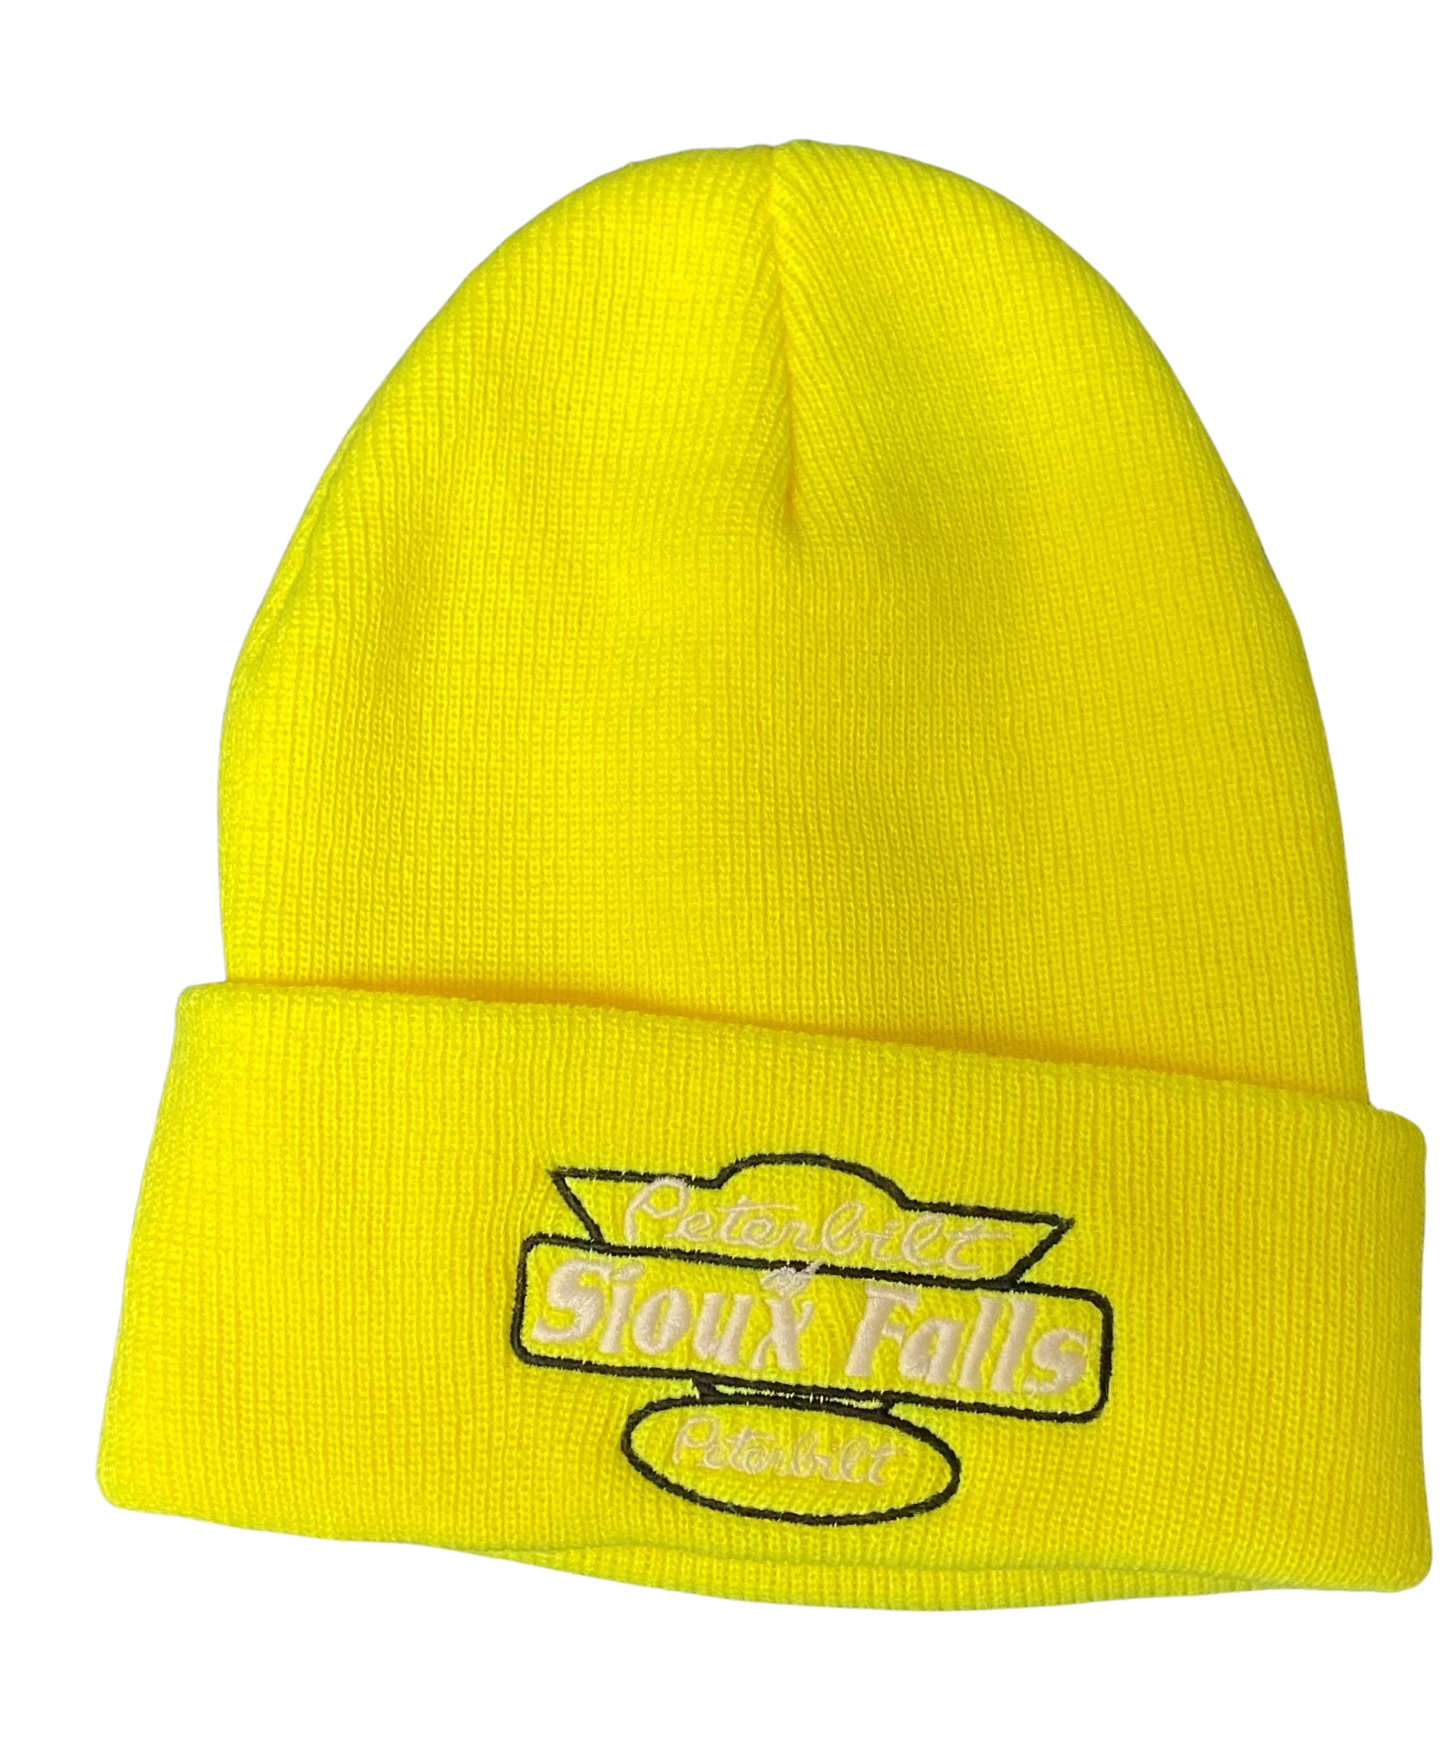 Construction Worker Yellow Stocking Hat